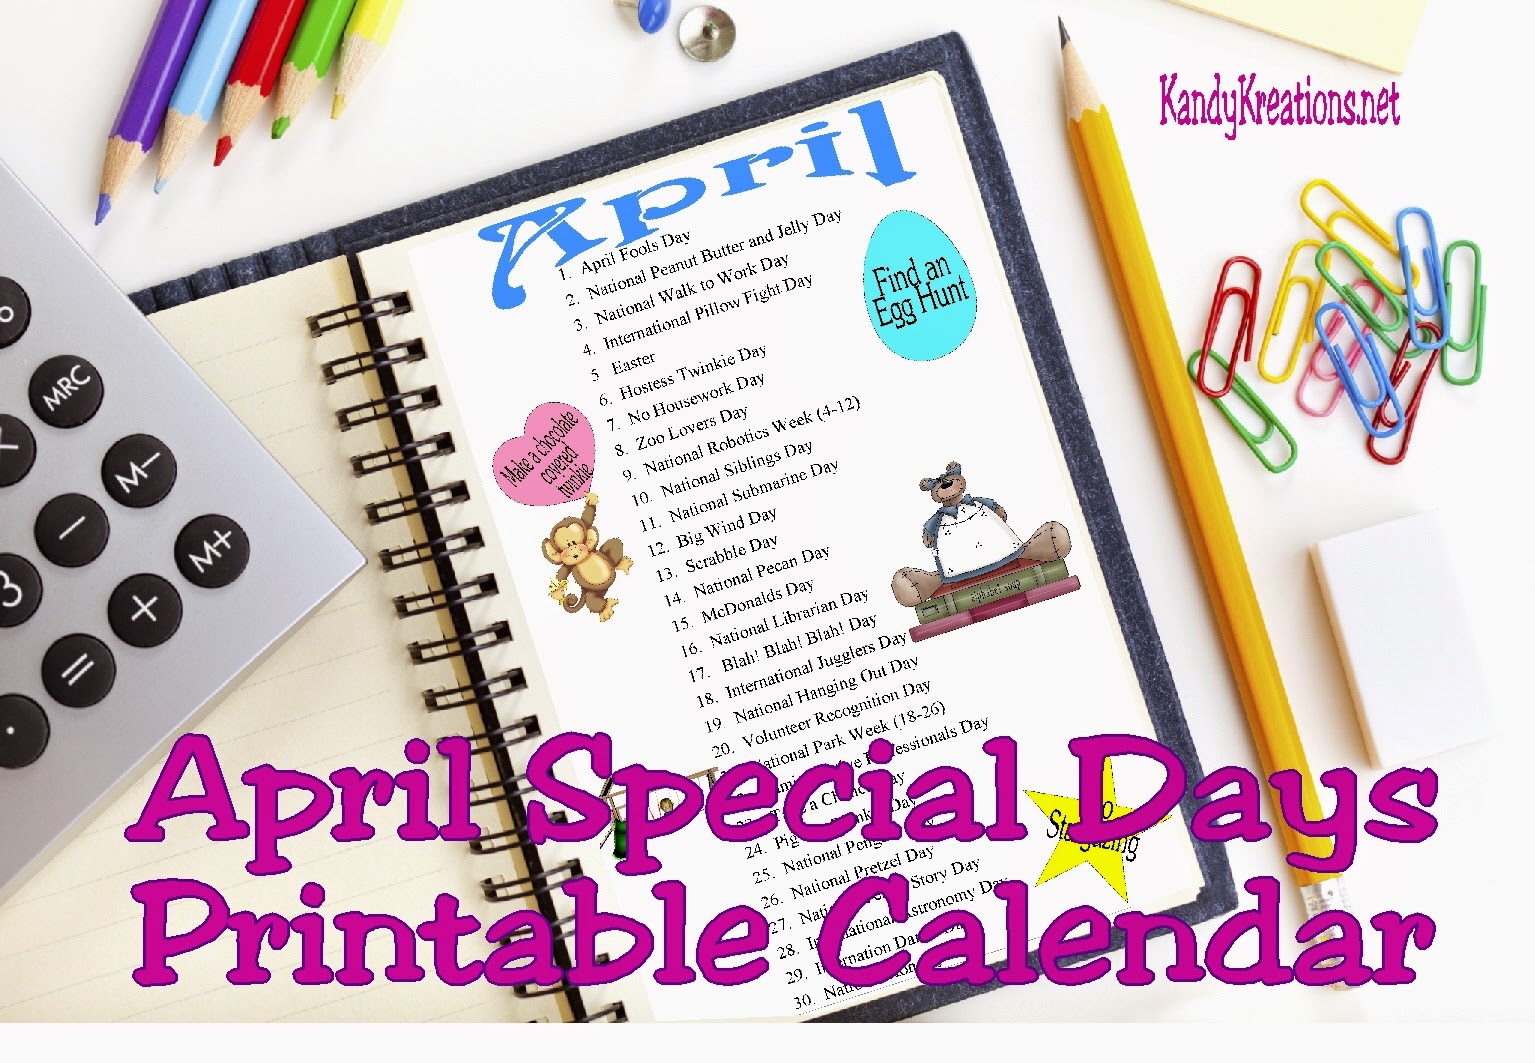 Make fun memories with your kids in April using these holidays and Special Days.  Calendar comes ready to print out and place in your planner or on your family command center.